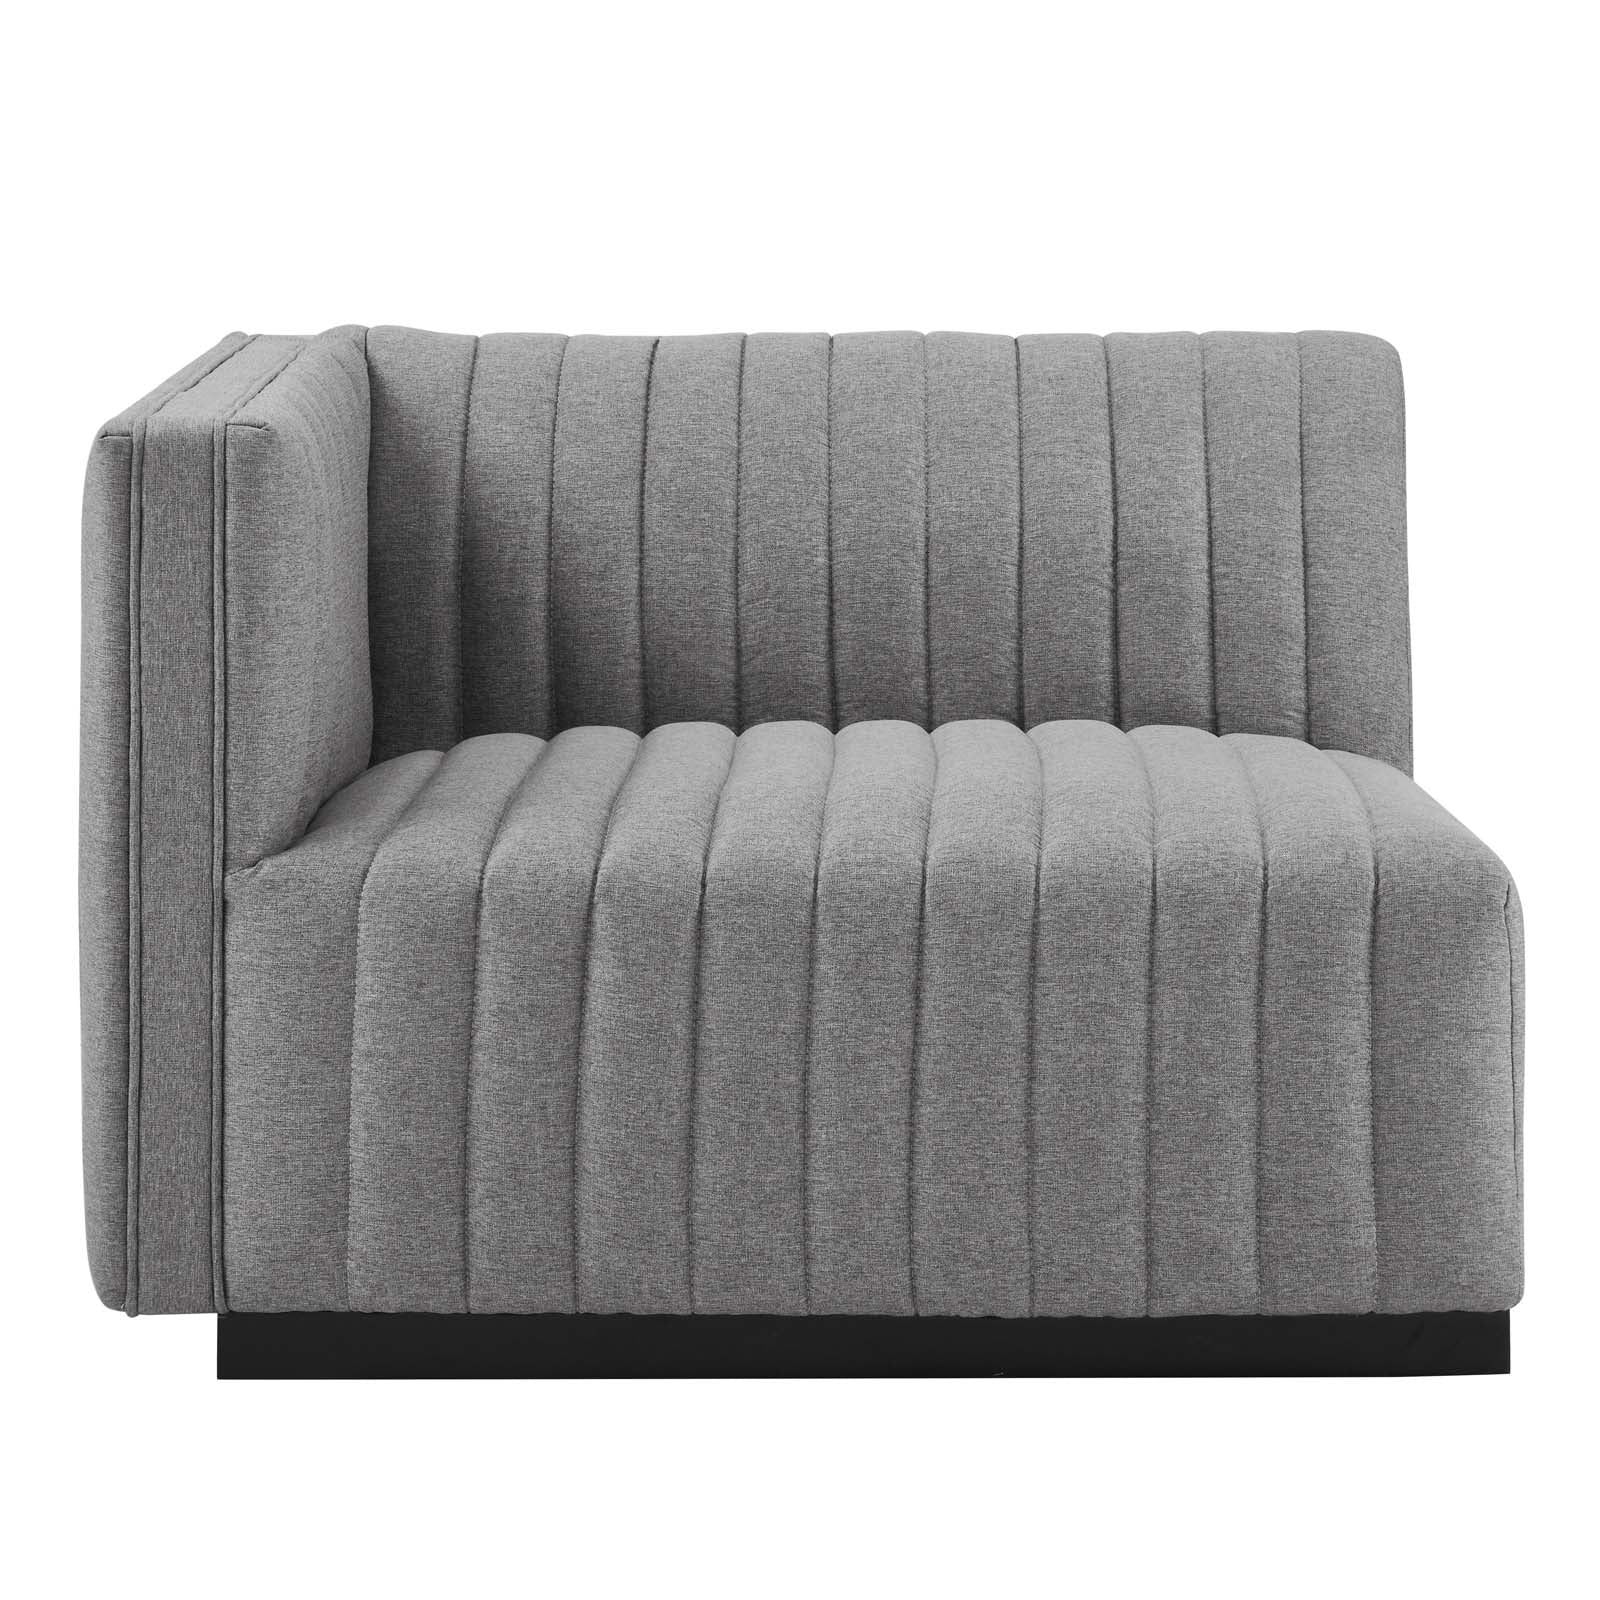 Modway Accent Chairs - Conjure Channel Tufted Upholstered Fabric Left-Arm Chair Black Light Gray